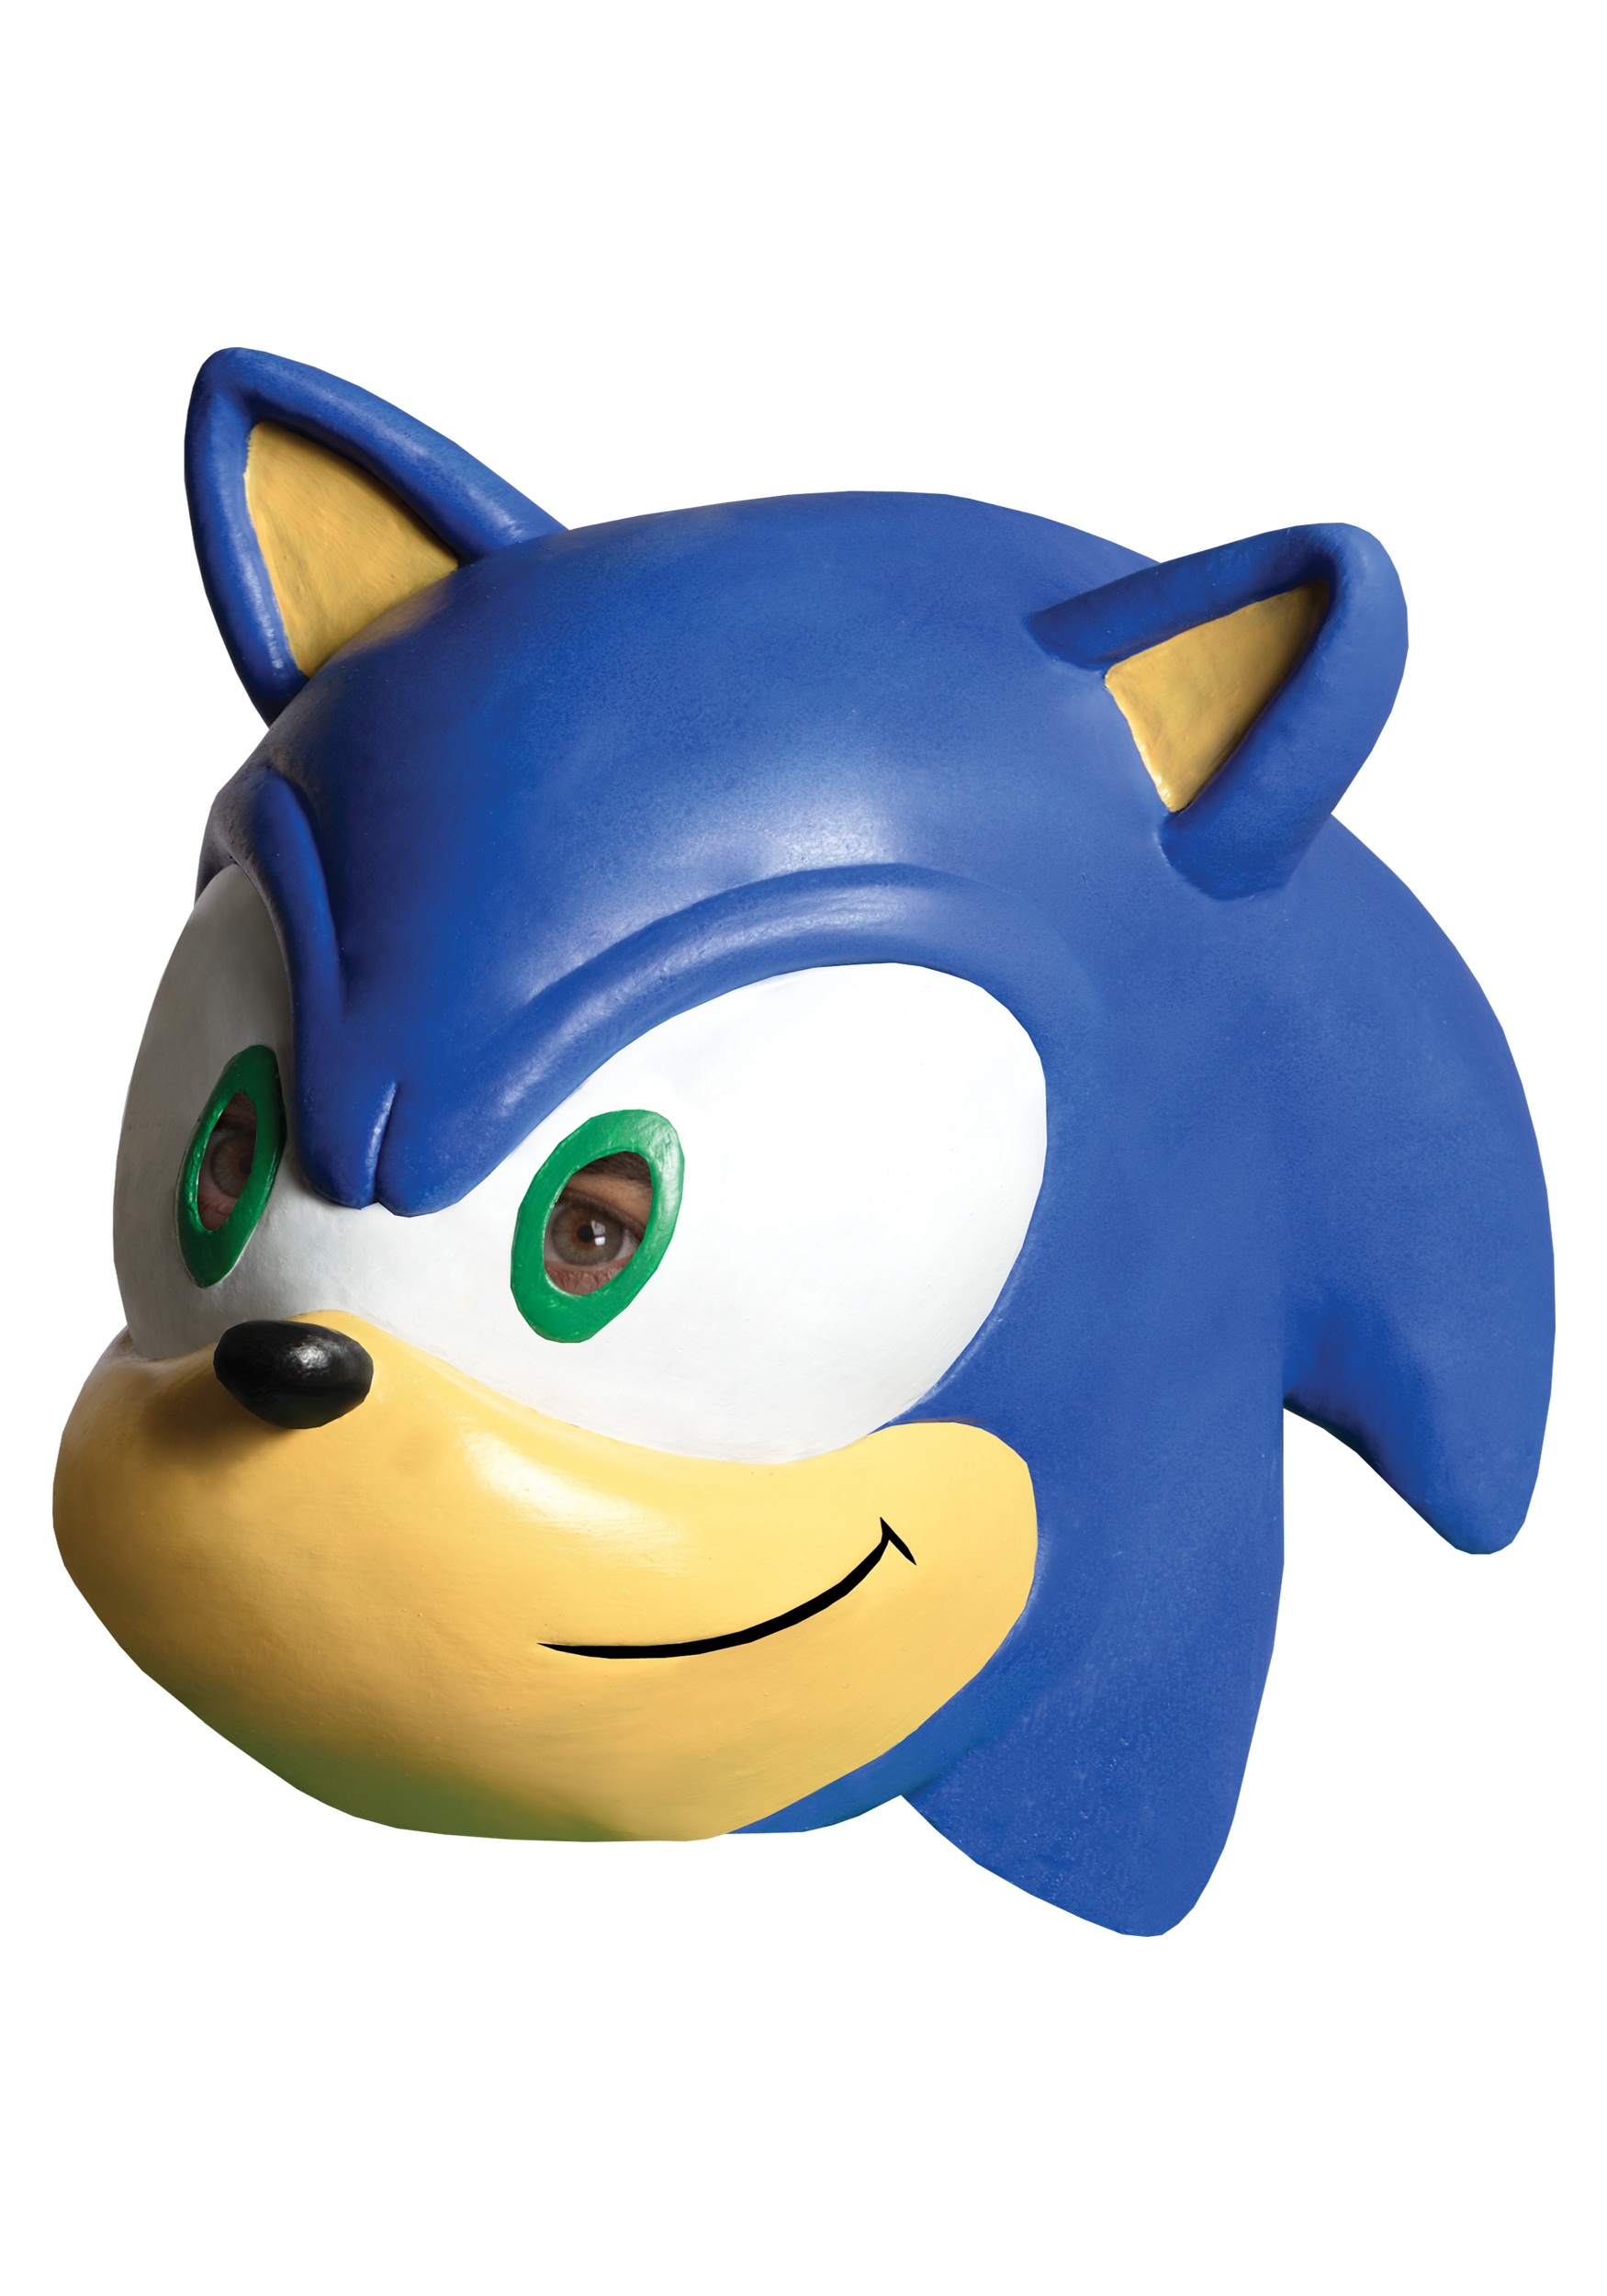 HALLOWEEN COSTUME MASK BLUE AND WHITE SONIC THE HEDGEHOG  LATEX CHILD-SIZED 